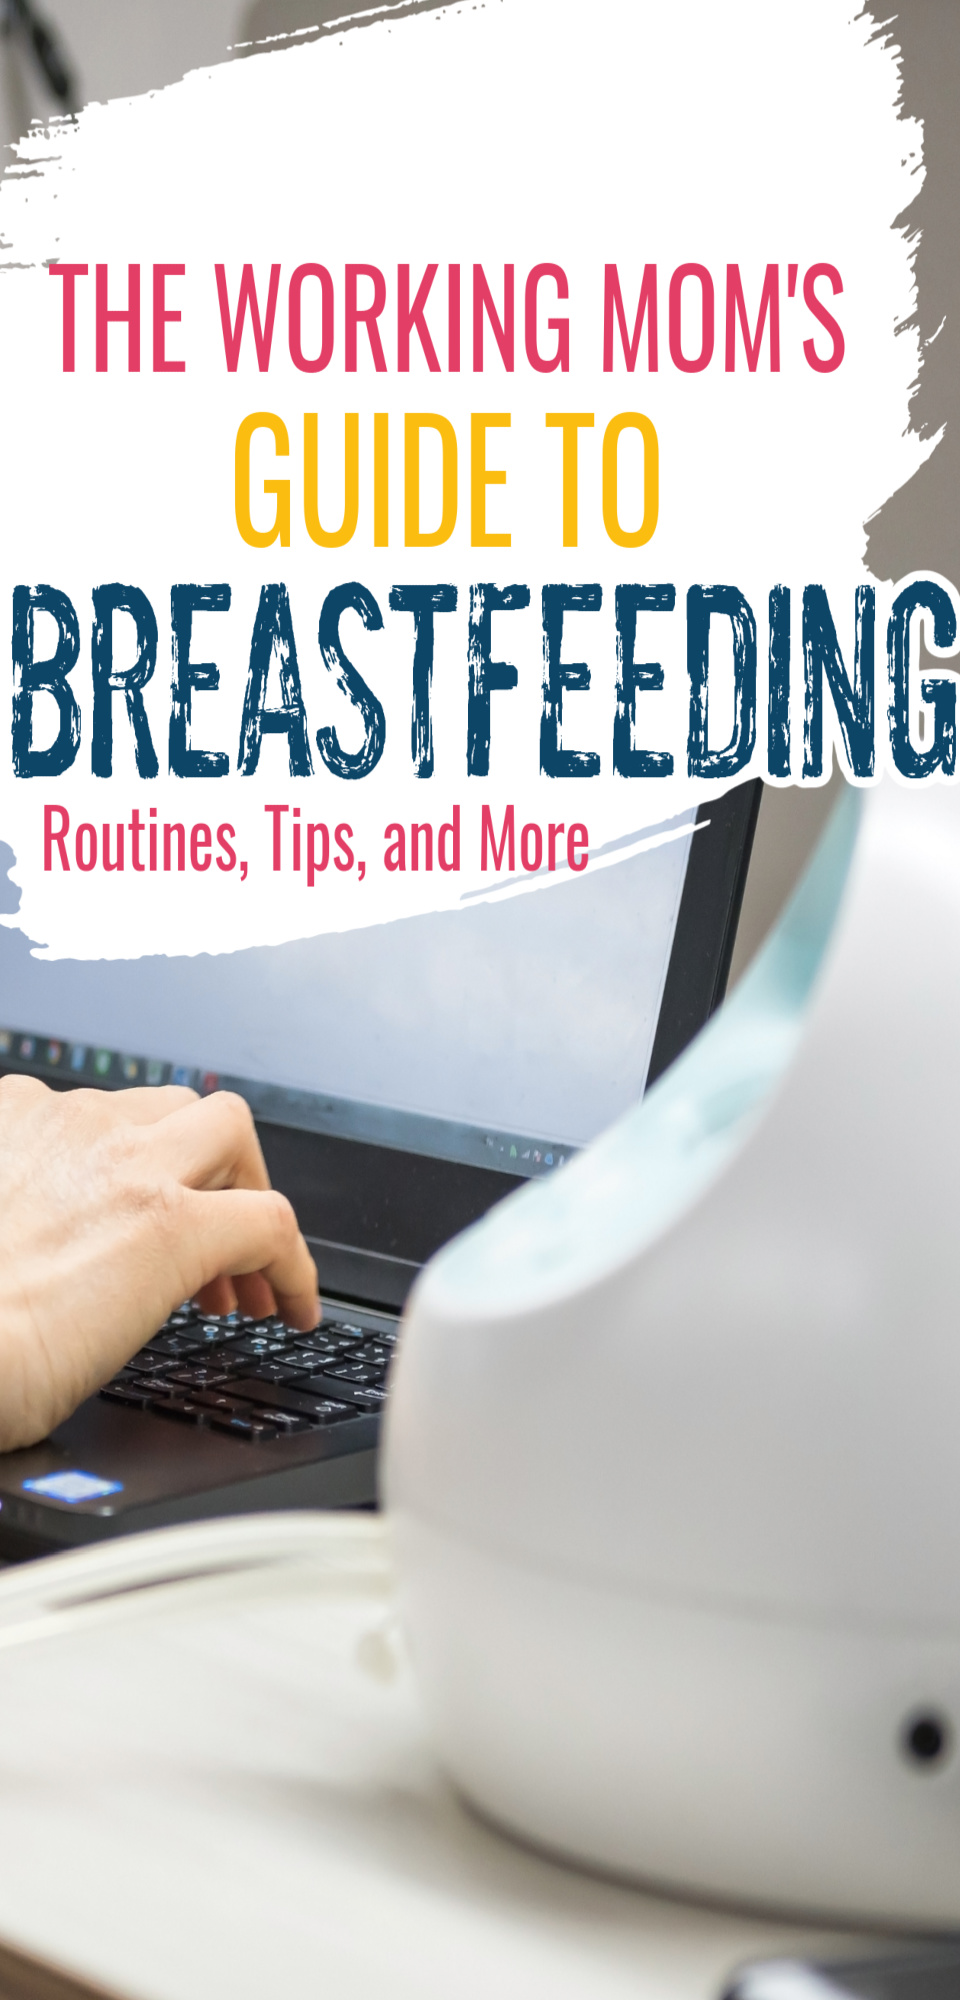 It can be hard to be a breastfeeding working mom- but it doesn't have to be impossible. Here are some practical tips and advice from a working mom on breastfeeding and going back to work. This post includes schedules, routines, tips and more.